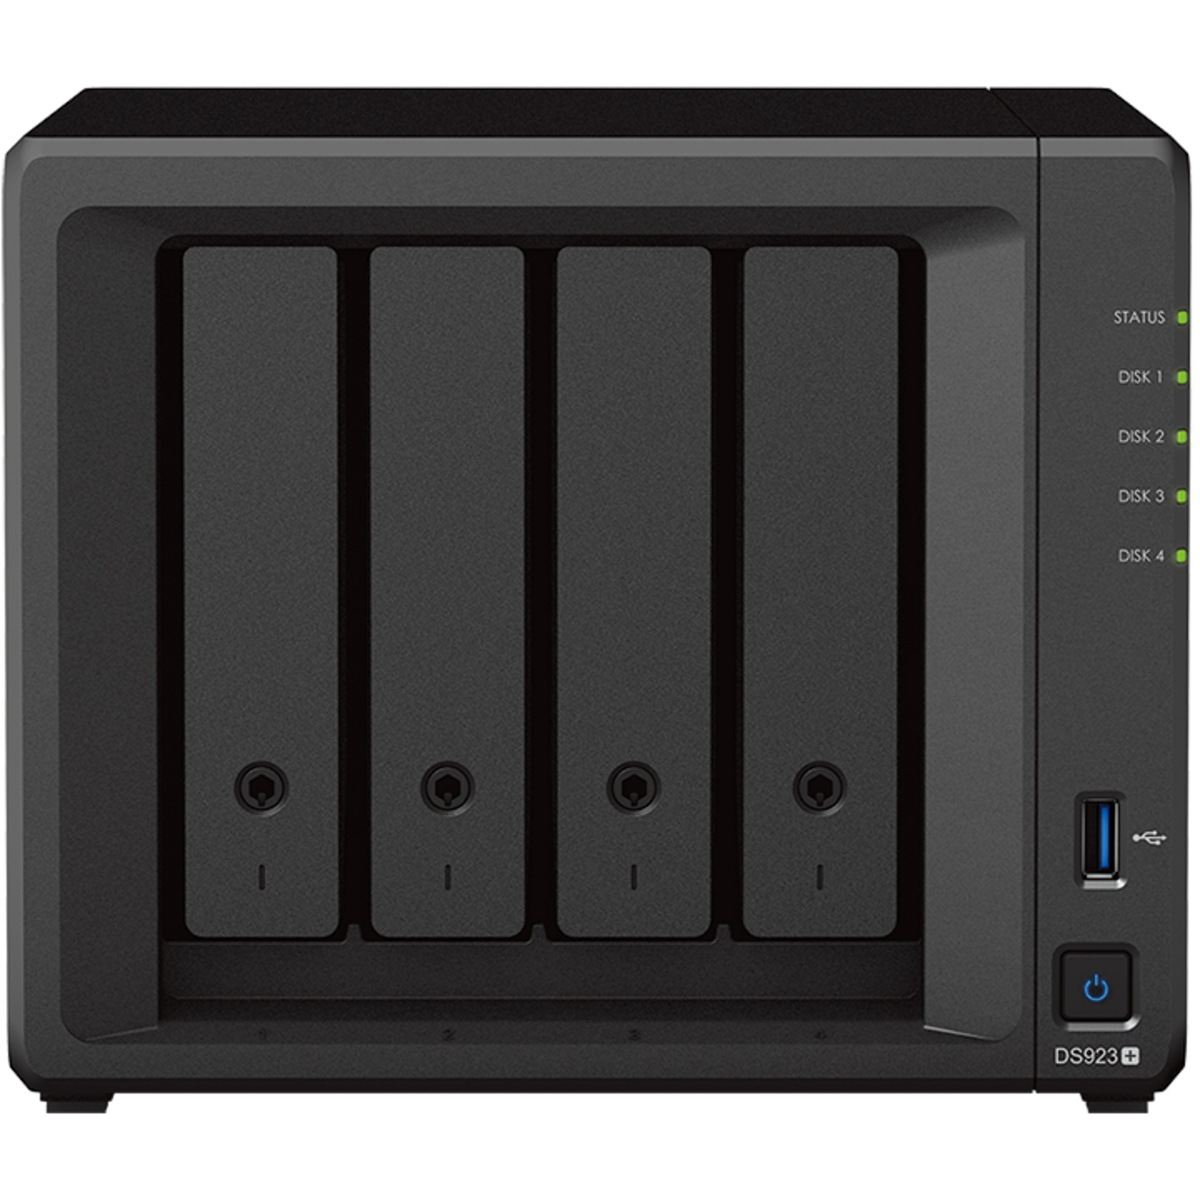 Synology DiskStation DS923+ 24tb 4-Bay Desktop Multimedia / Power User / Business NAS - Network Attached Storage Device 2x12tb Seagate IronWolf Pro ST12000NT001 3.5 7200rpm SATA 6Gb/s HDD NAS Class Drives Installed - Burn-In Tested - ON SALE - FREE RAM UPGRADE DiskStation DS923+